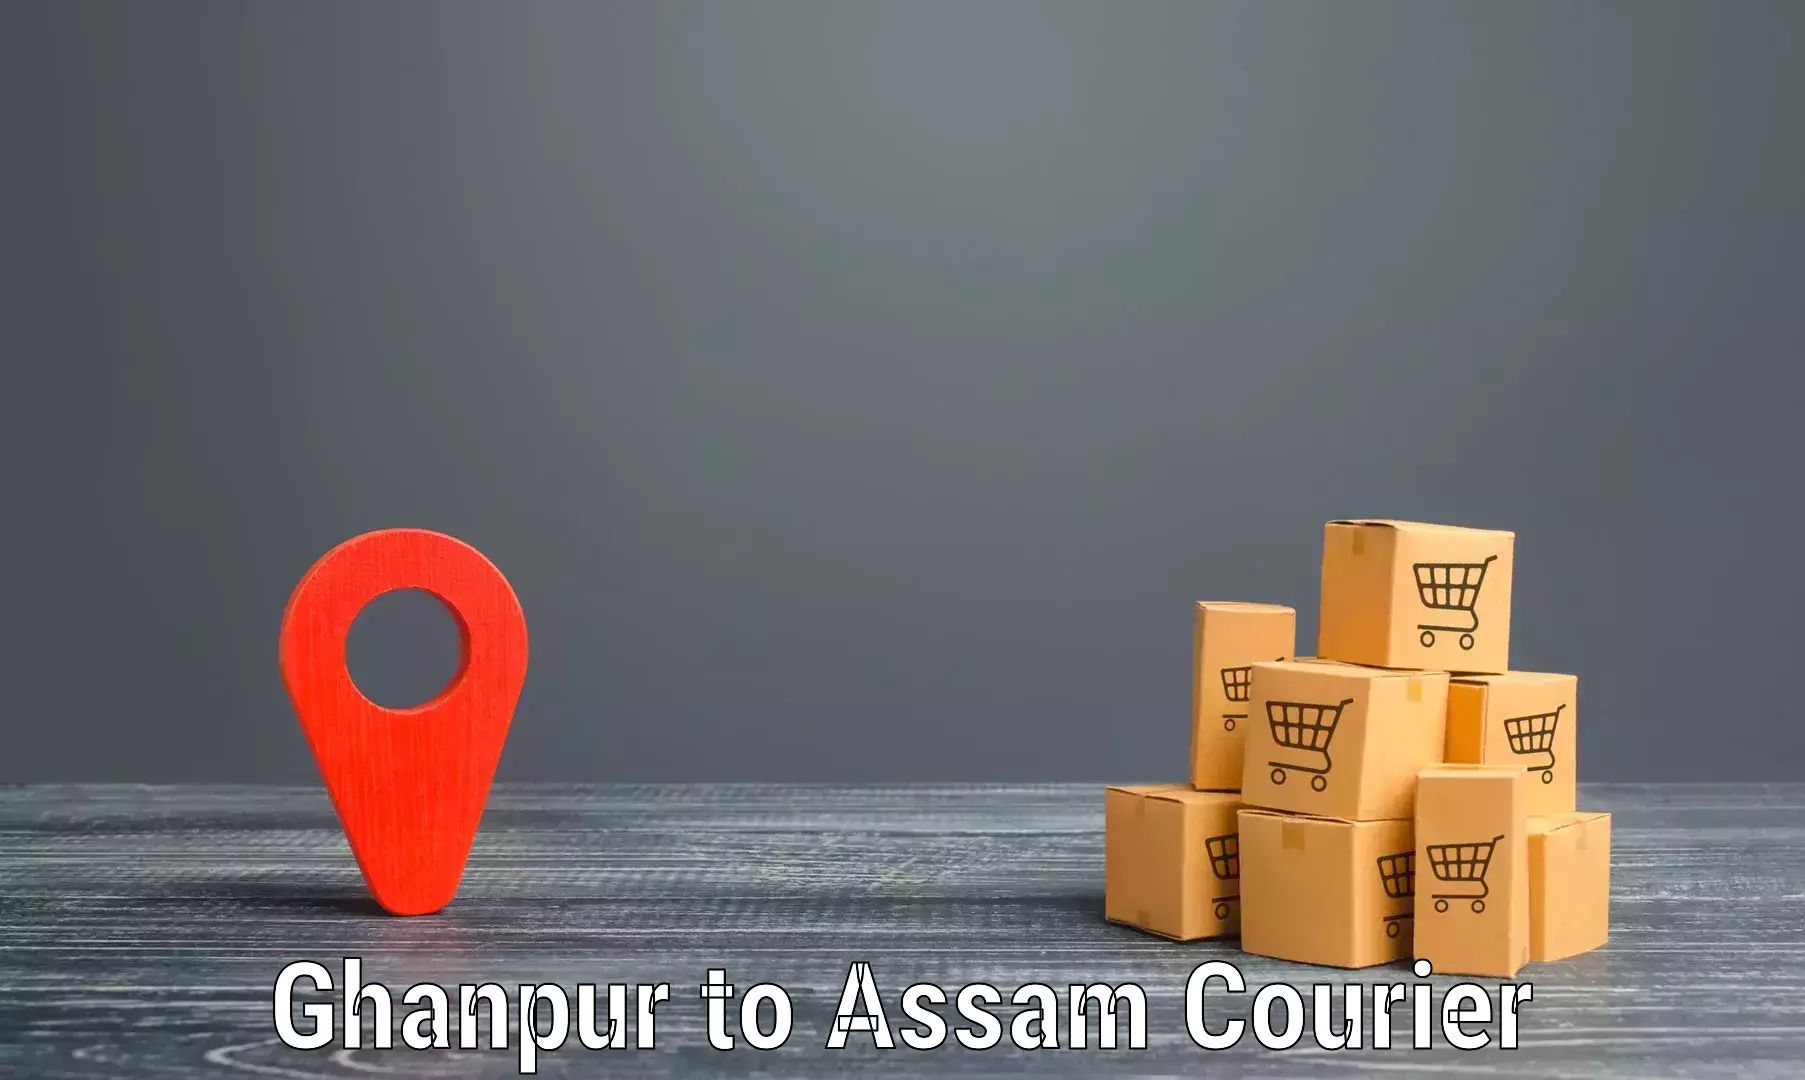 Next-day freight services Ghanpur to Gauhati University Guwahati